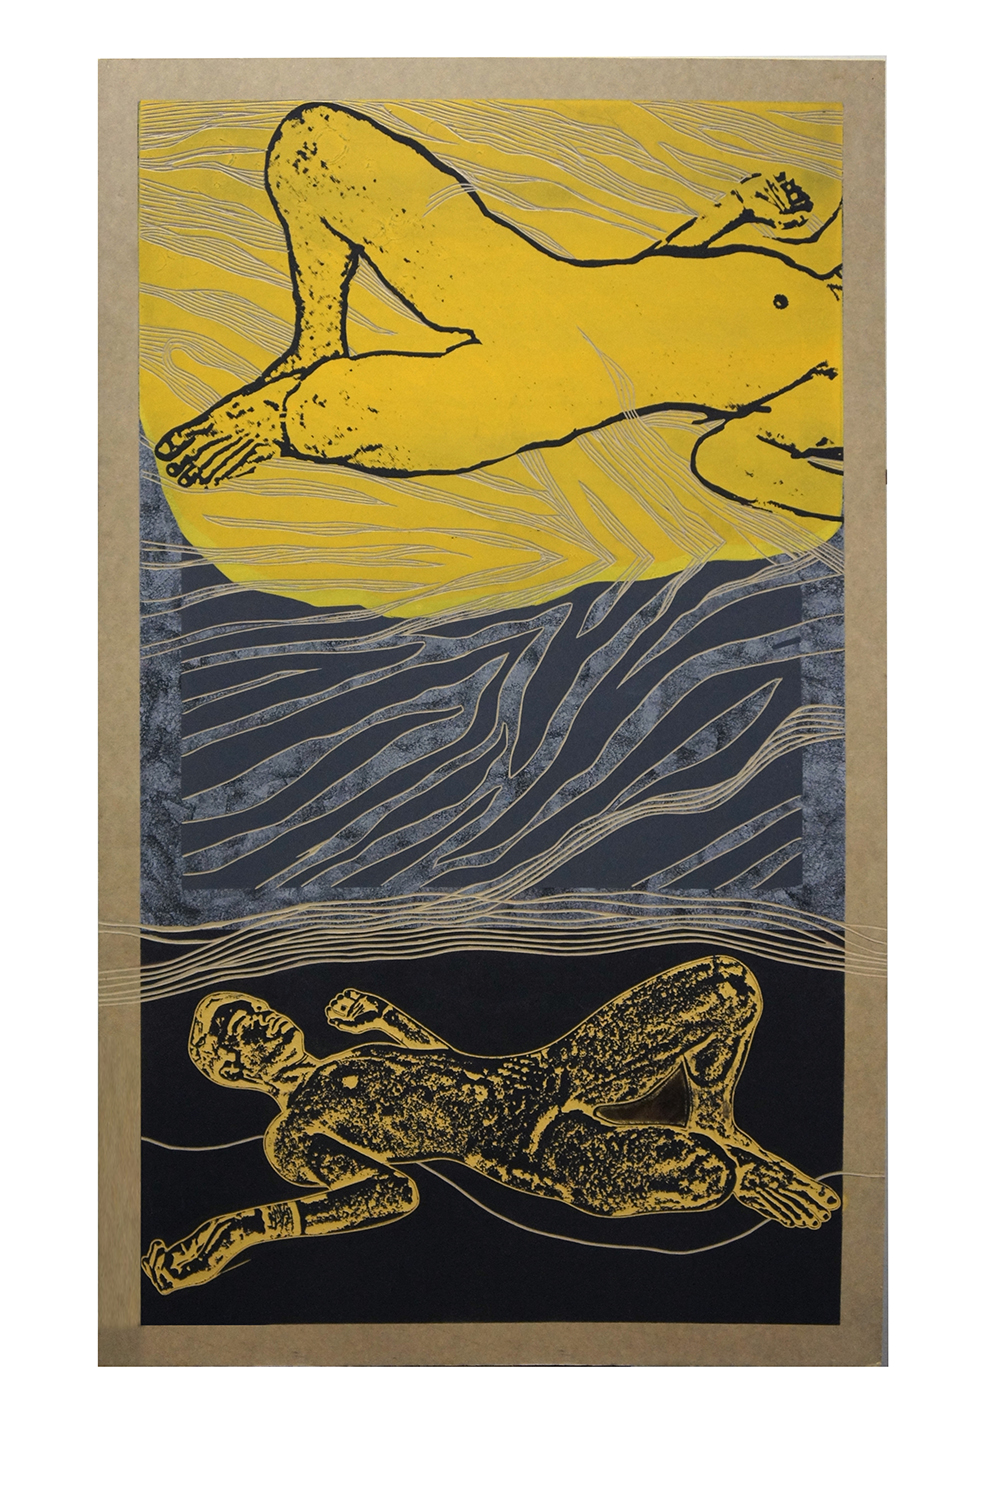 MARKS, Ananda Moy Banerji, RIVER SUTRA, IV Woodcut and Serigraph on MDF, 60-36 inches, 2019